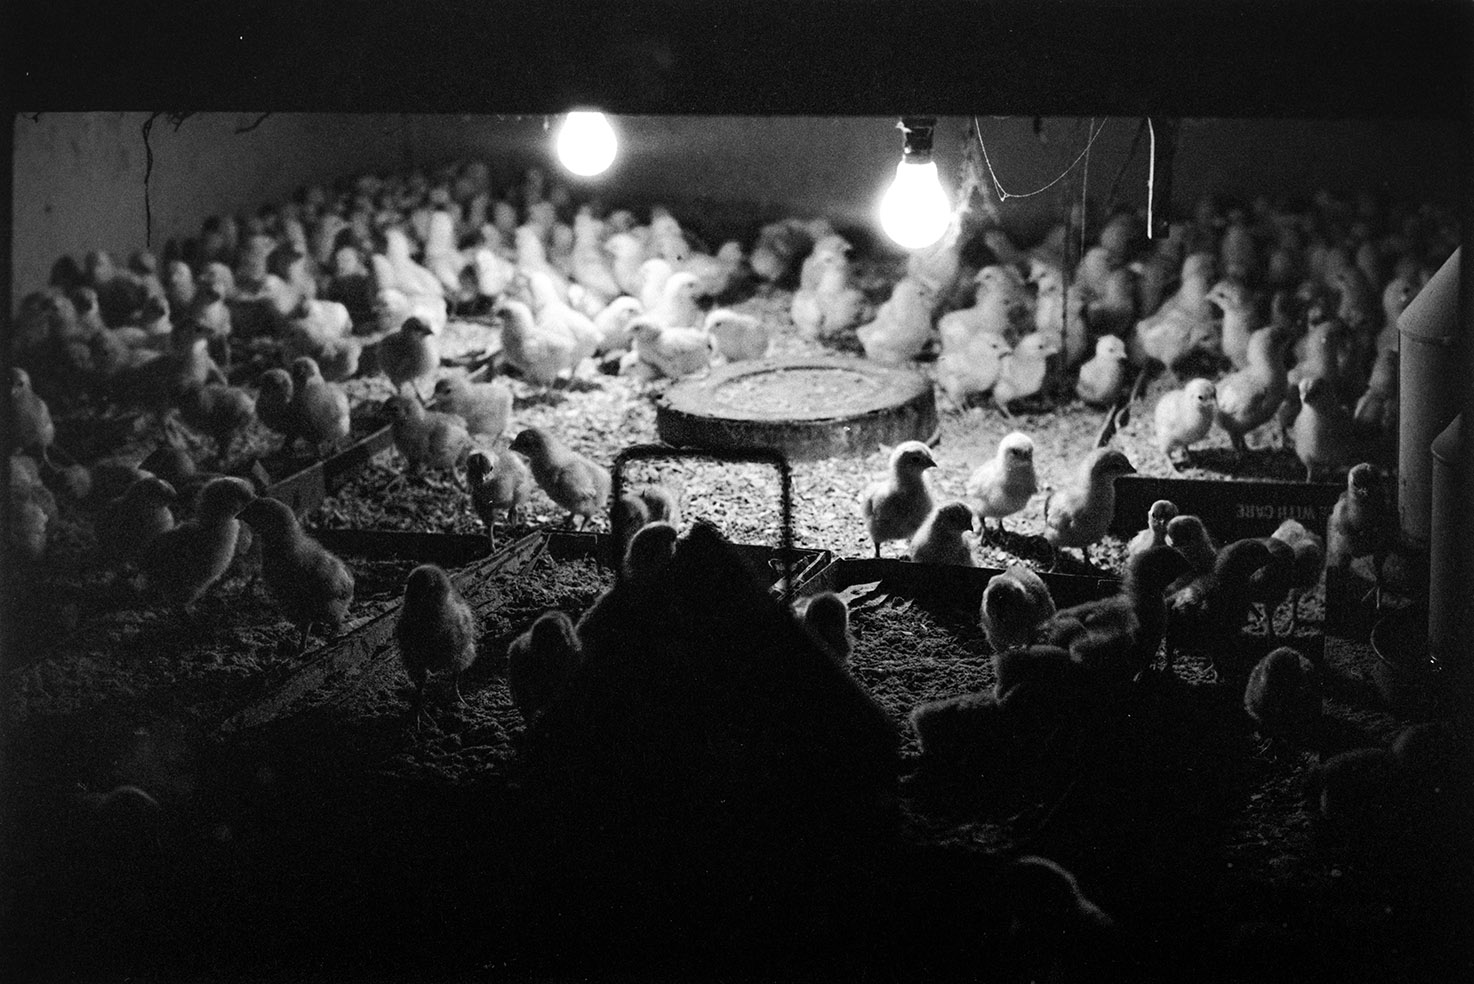  Intensively reared chicks living by artificial light